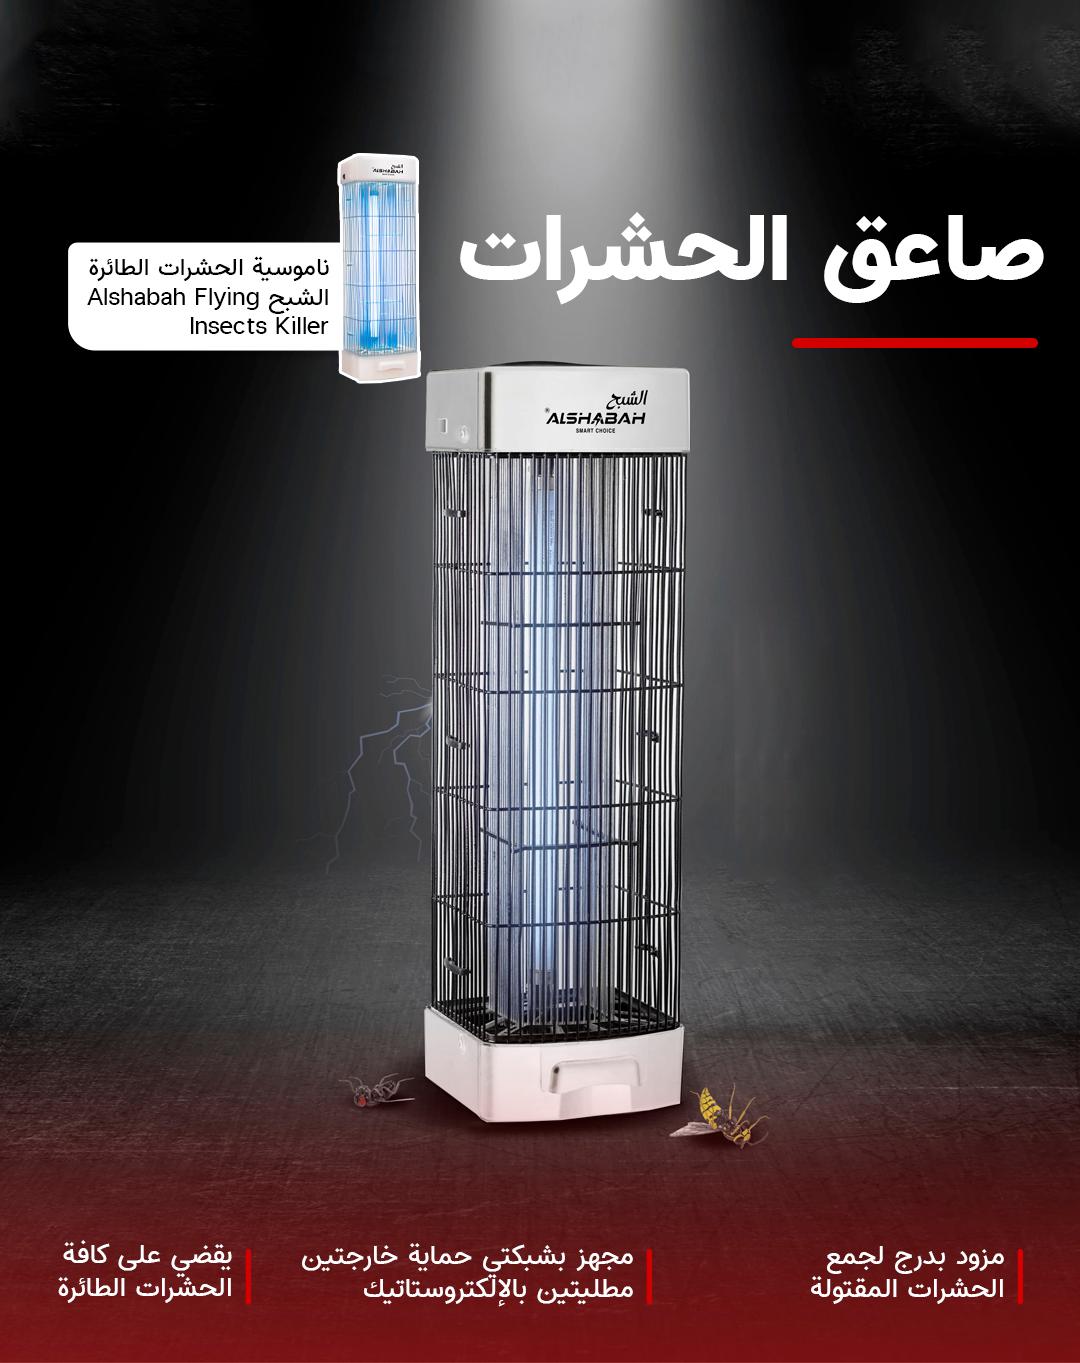 Al Shabah Flying Insects Killer 3800Watts